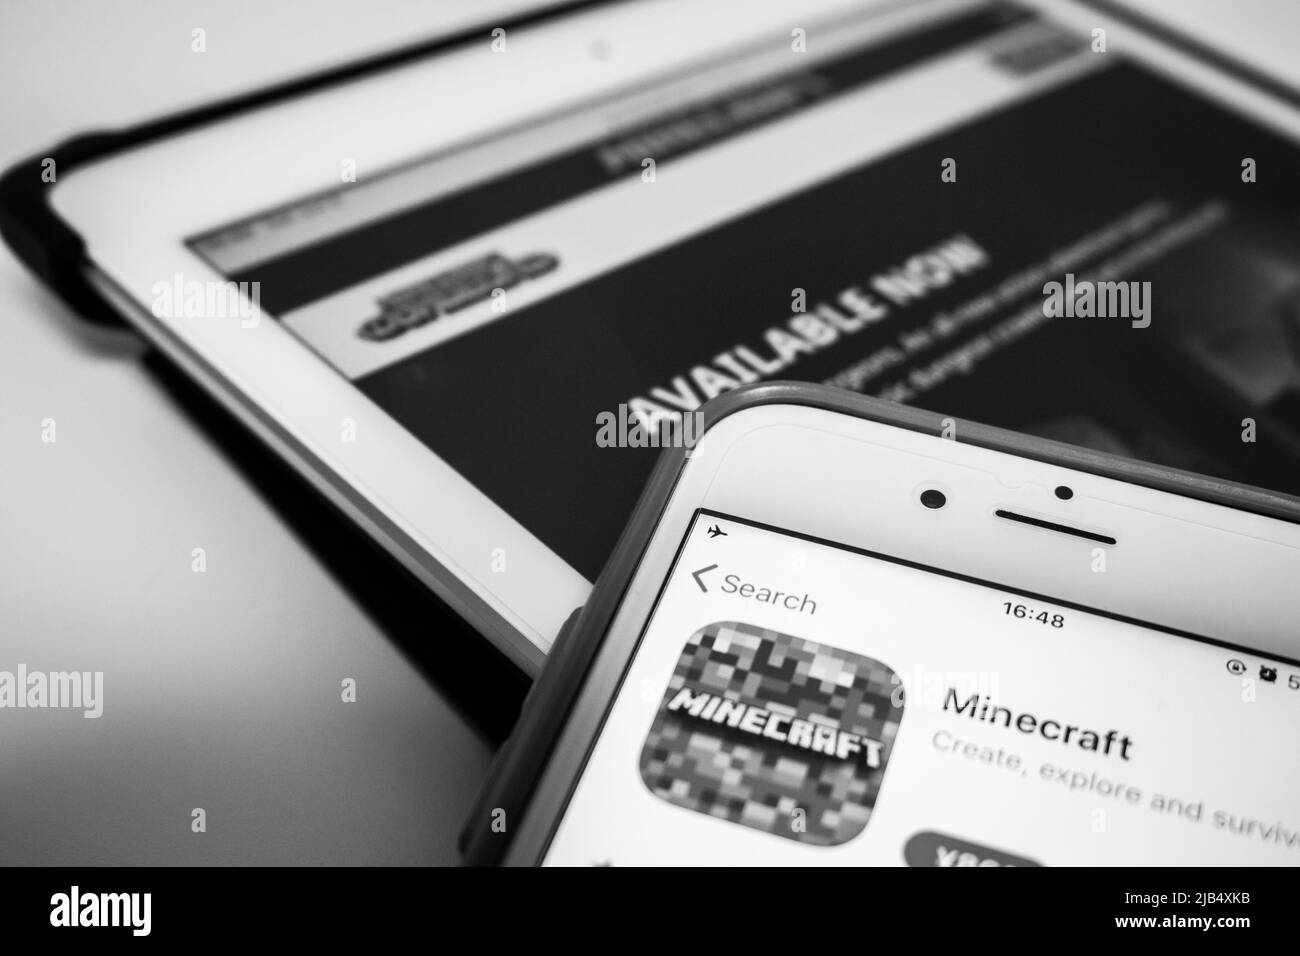 Minecraft in App Store on iPhone and Minecraft Dungeons on iPad in monochrome. Minecraft is a sandbox video game by Mojang Studios Stock Photo